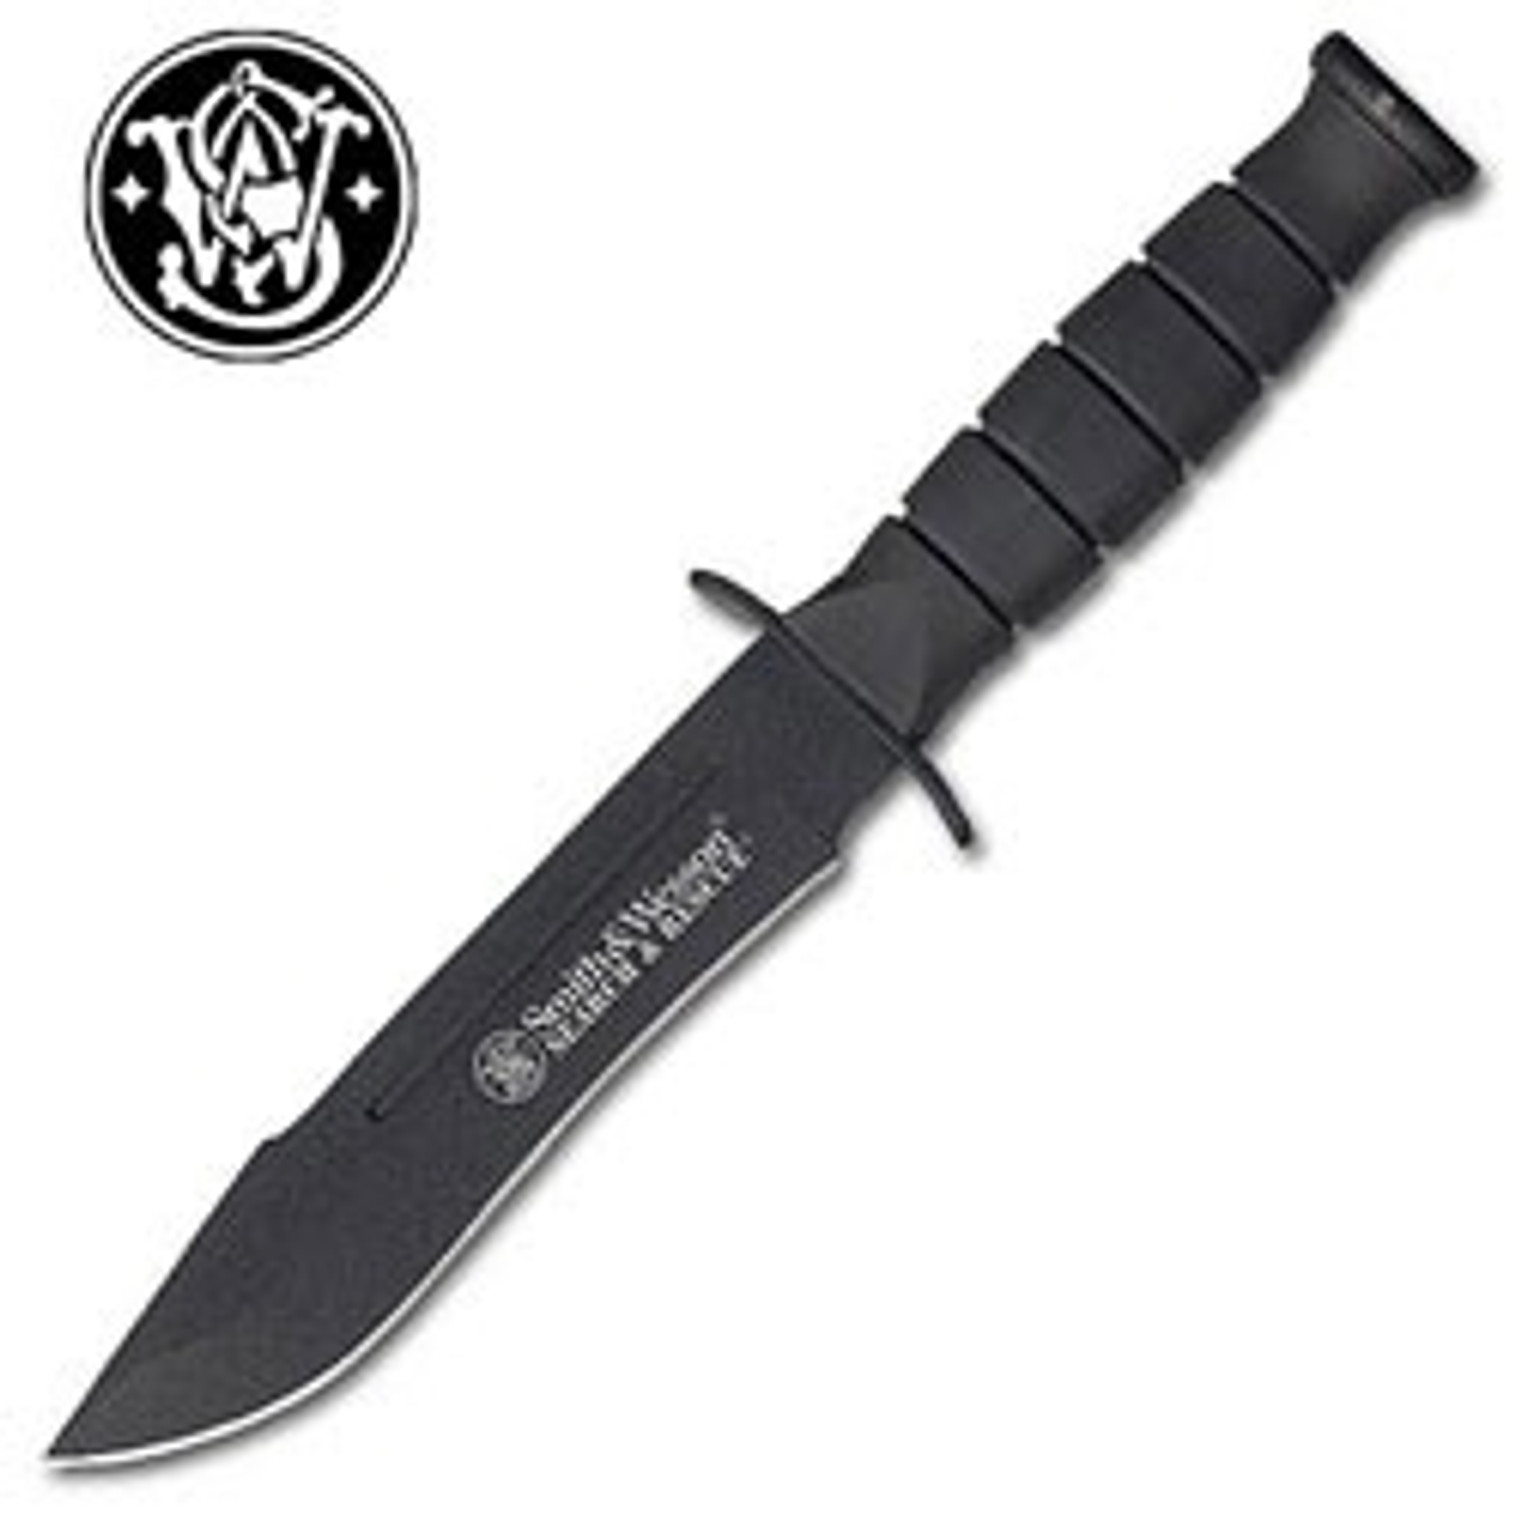 Smith & Wesson CKSUR1 Search & Rescue Knife